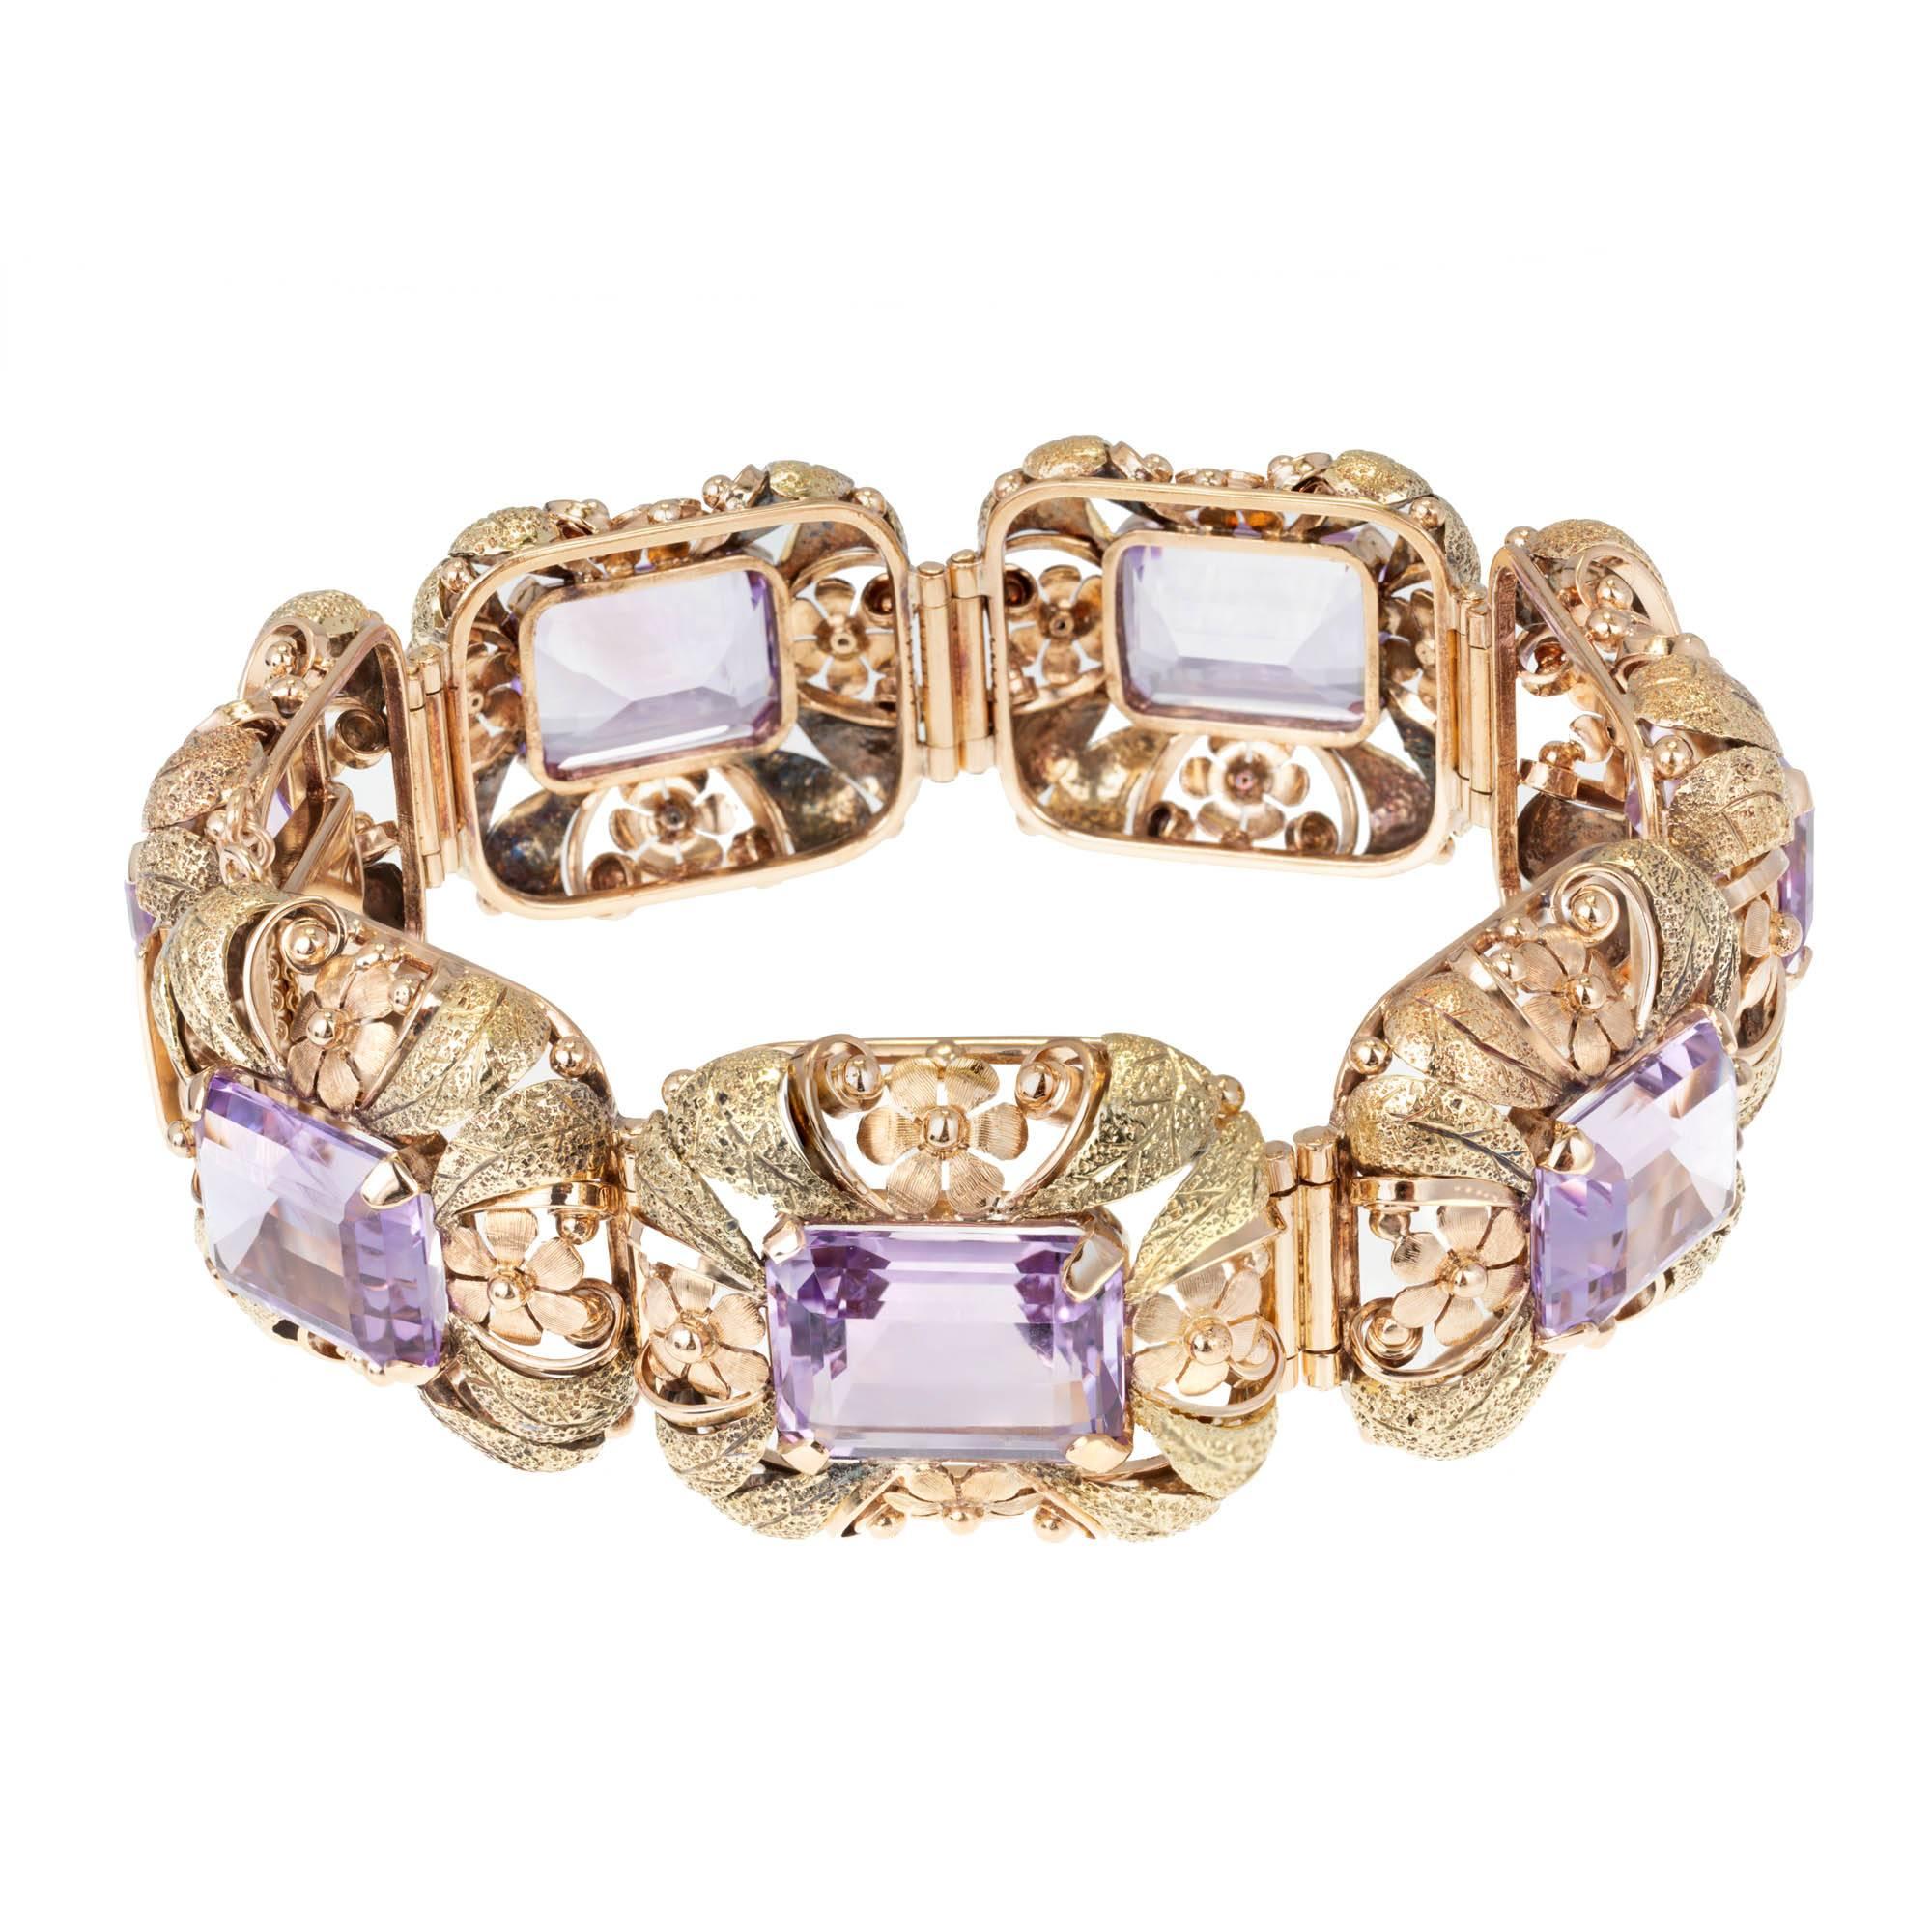 Handmade pink and green gold 7 section amethyst hinged bracelet. Hand formed flower motif 3-D Sections hinged sections. Set with 7 genuine Emerald cut Amethyst GIA certified as natural. Well matched soft purple. Circa 1930.
Please see our matching